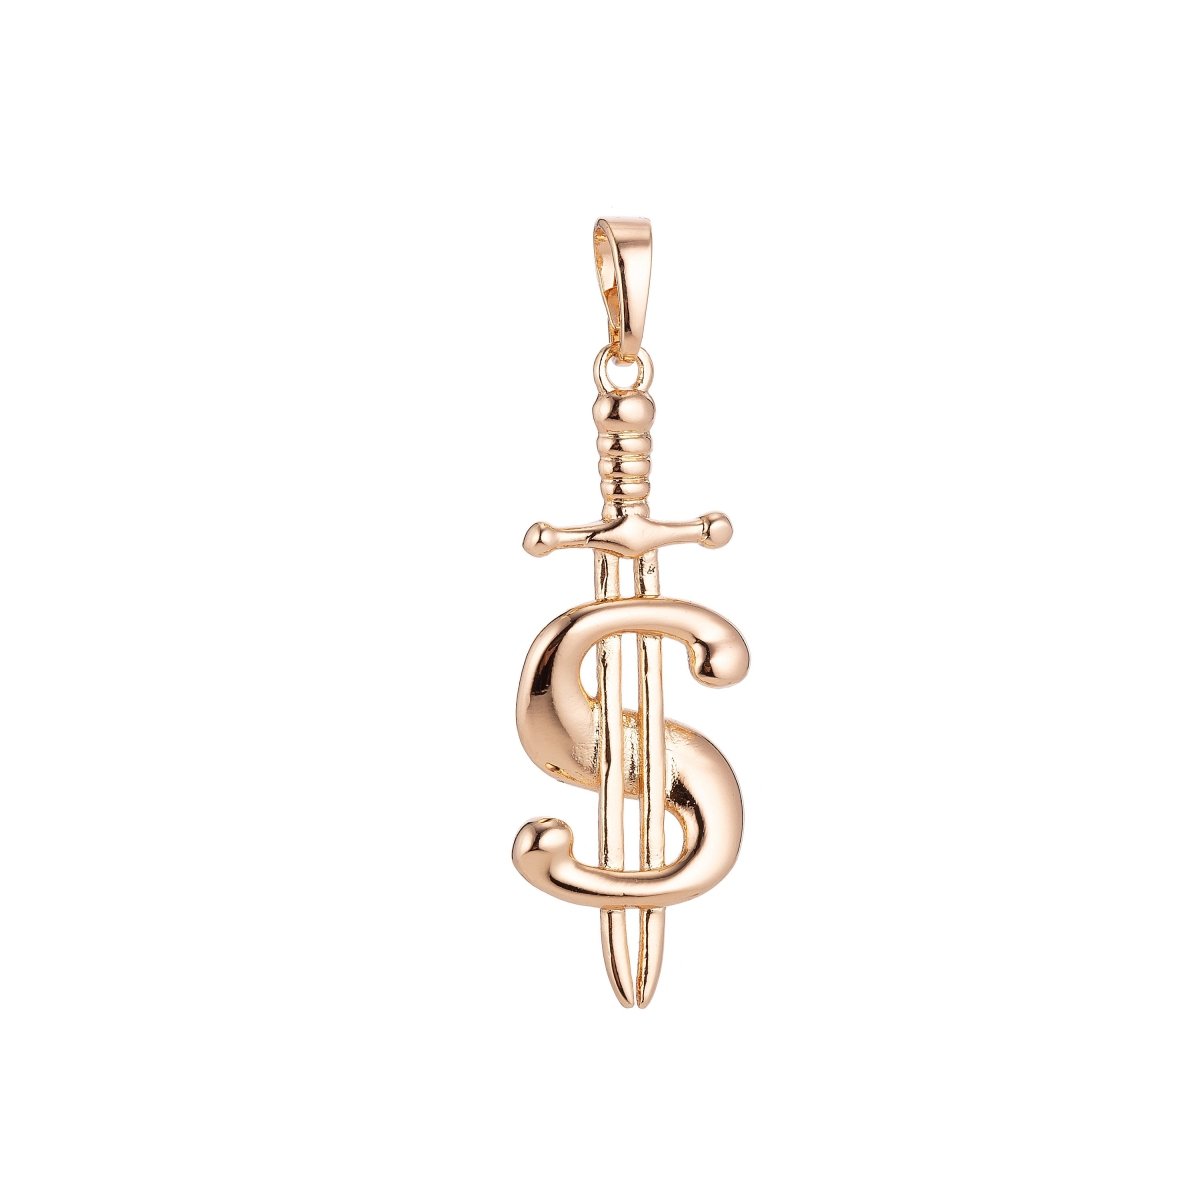 18k Gold Filled Unique Money Dollar Sign, Mighty Sword Weapon, Necklace Pendant Bead Bails Findings for Jewelry Making H-594 - DLUXCA